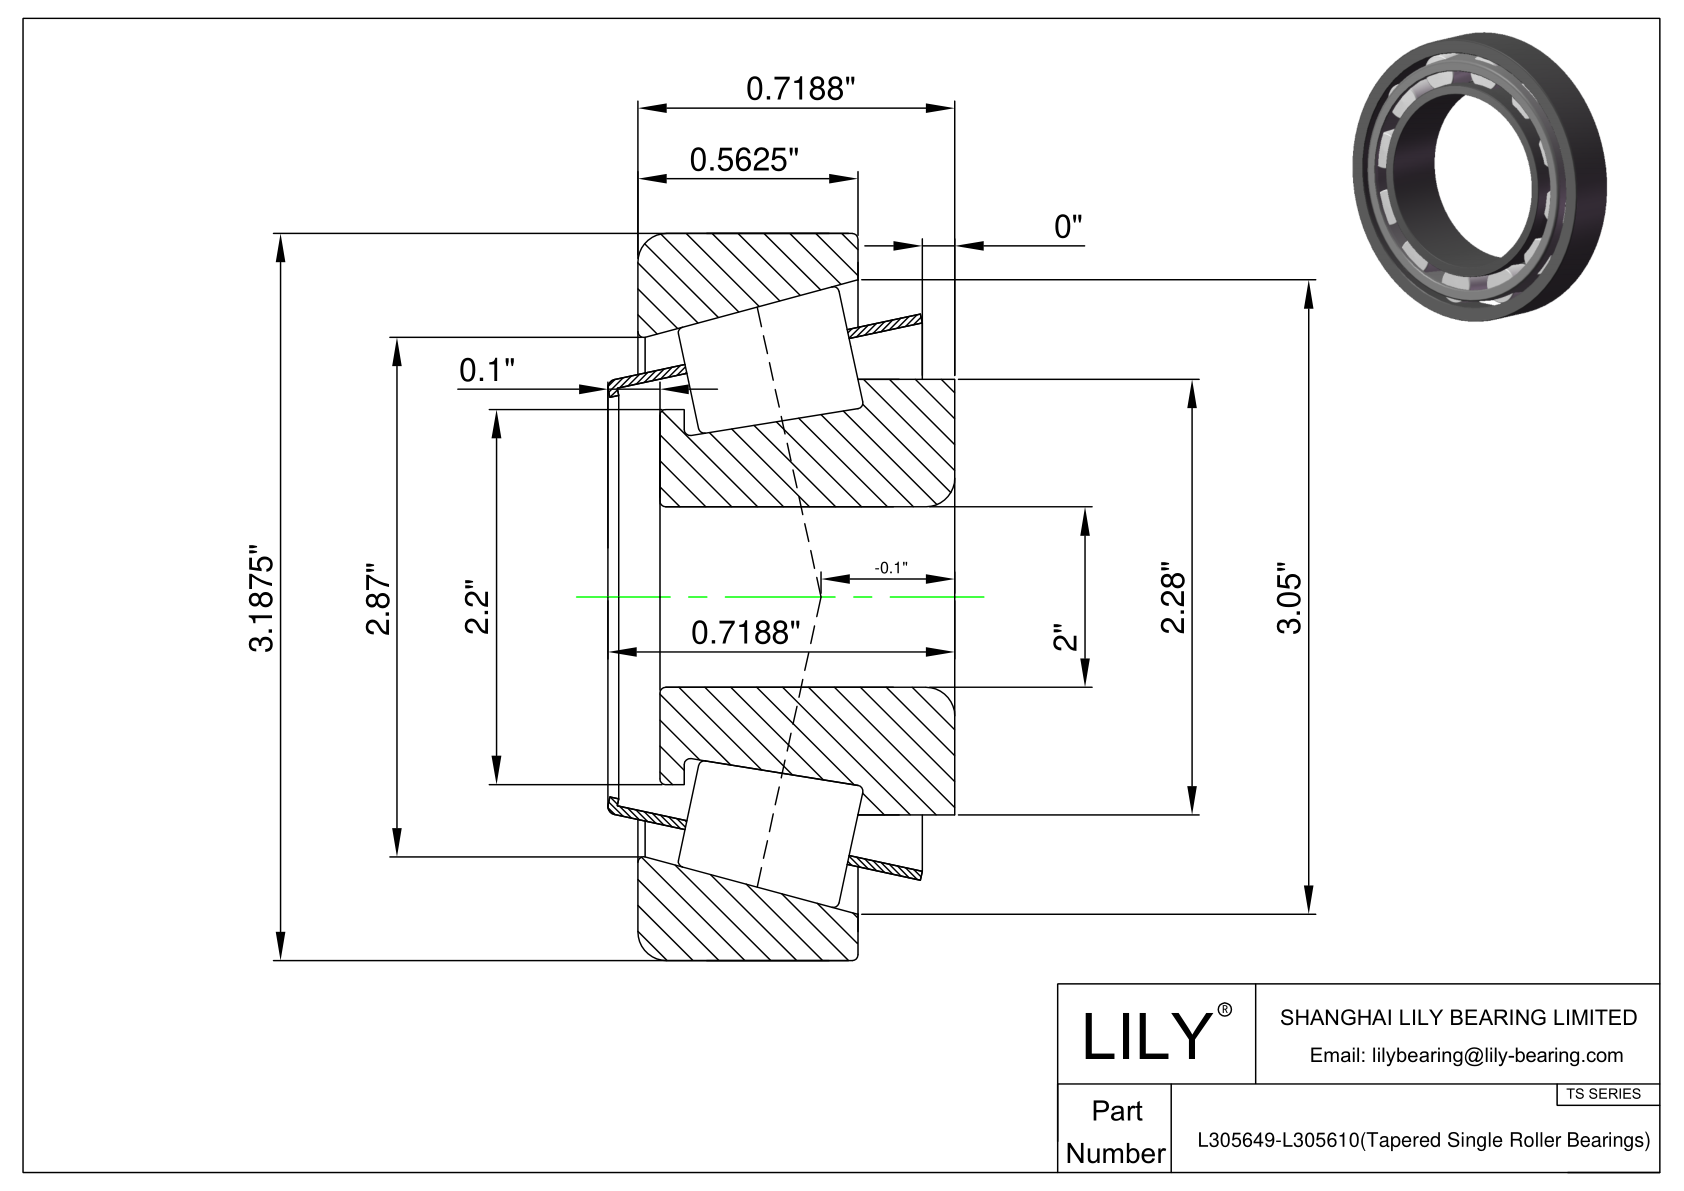 L305649-L305610 TS (Tapered Single Roller Bearings) (Imperial) cad drawing